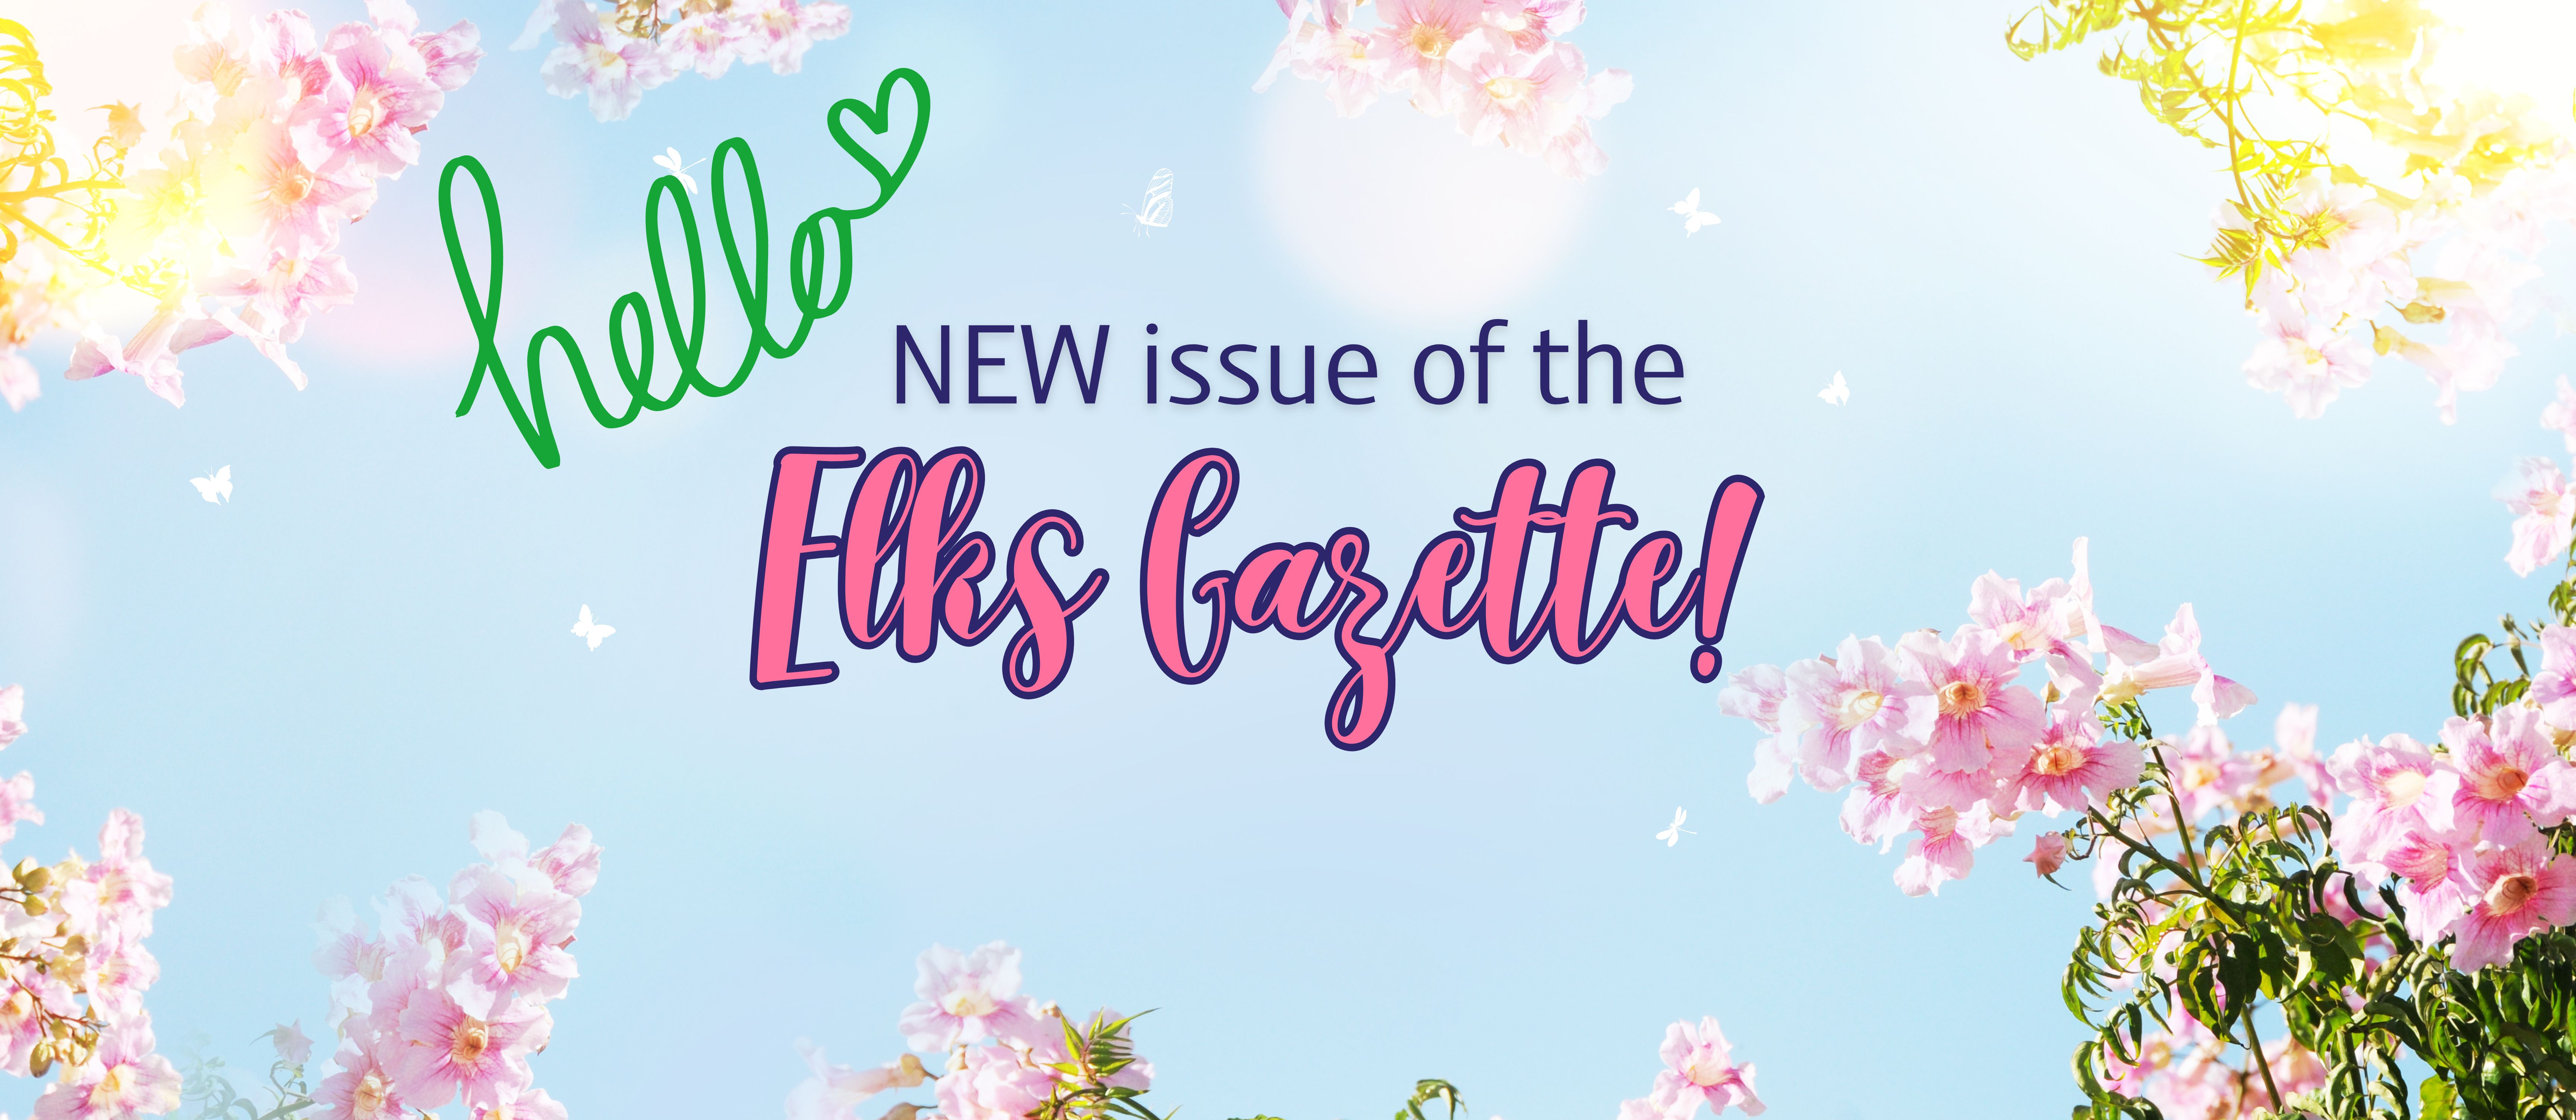 hello new issue of the Elks Gazette